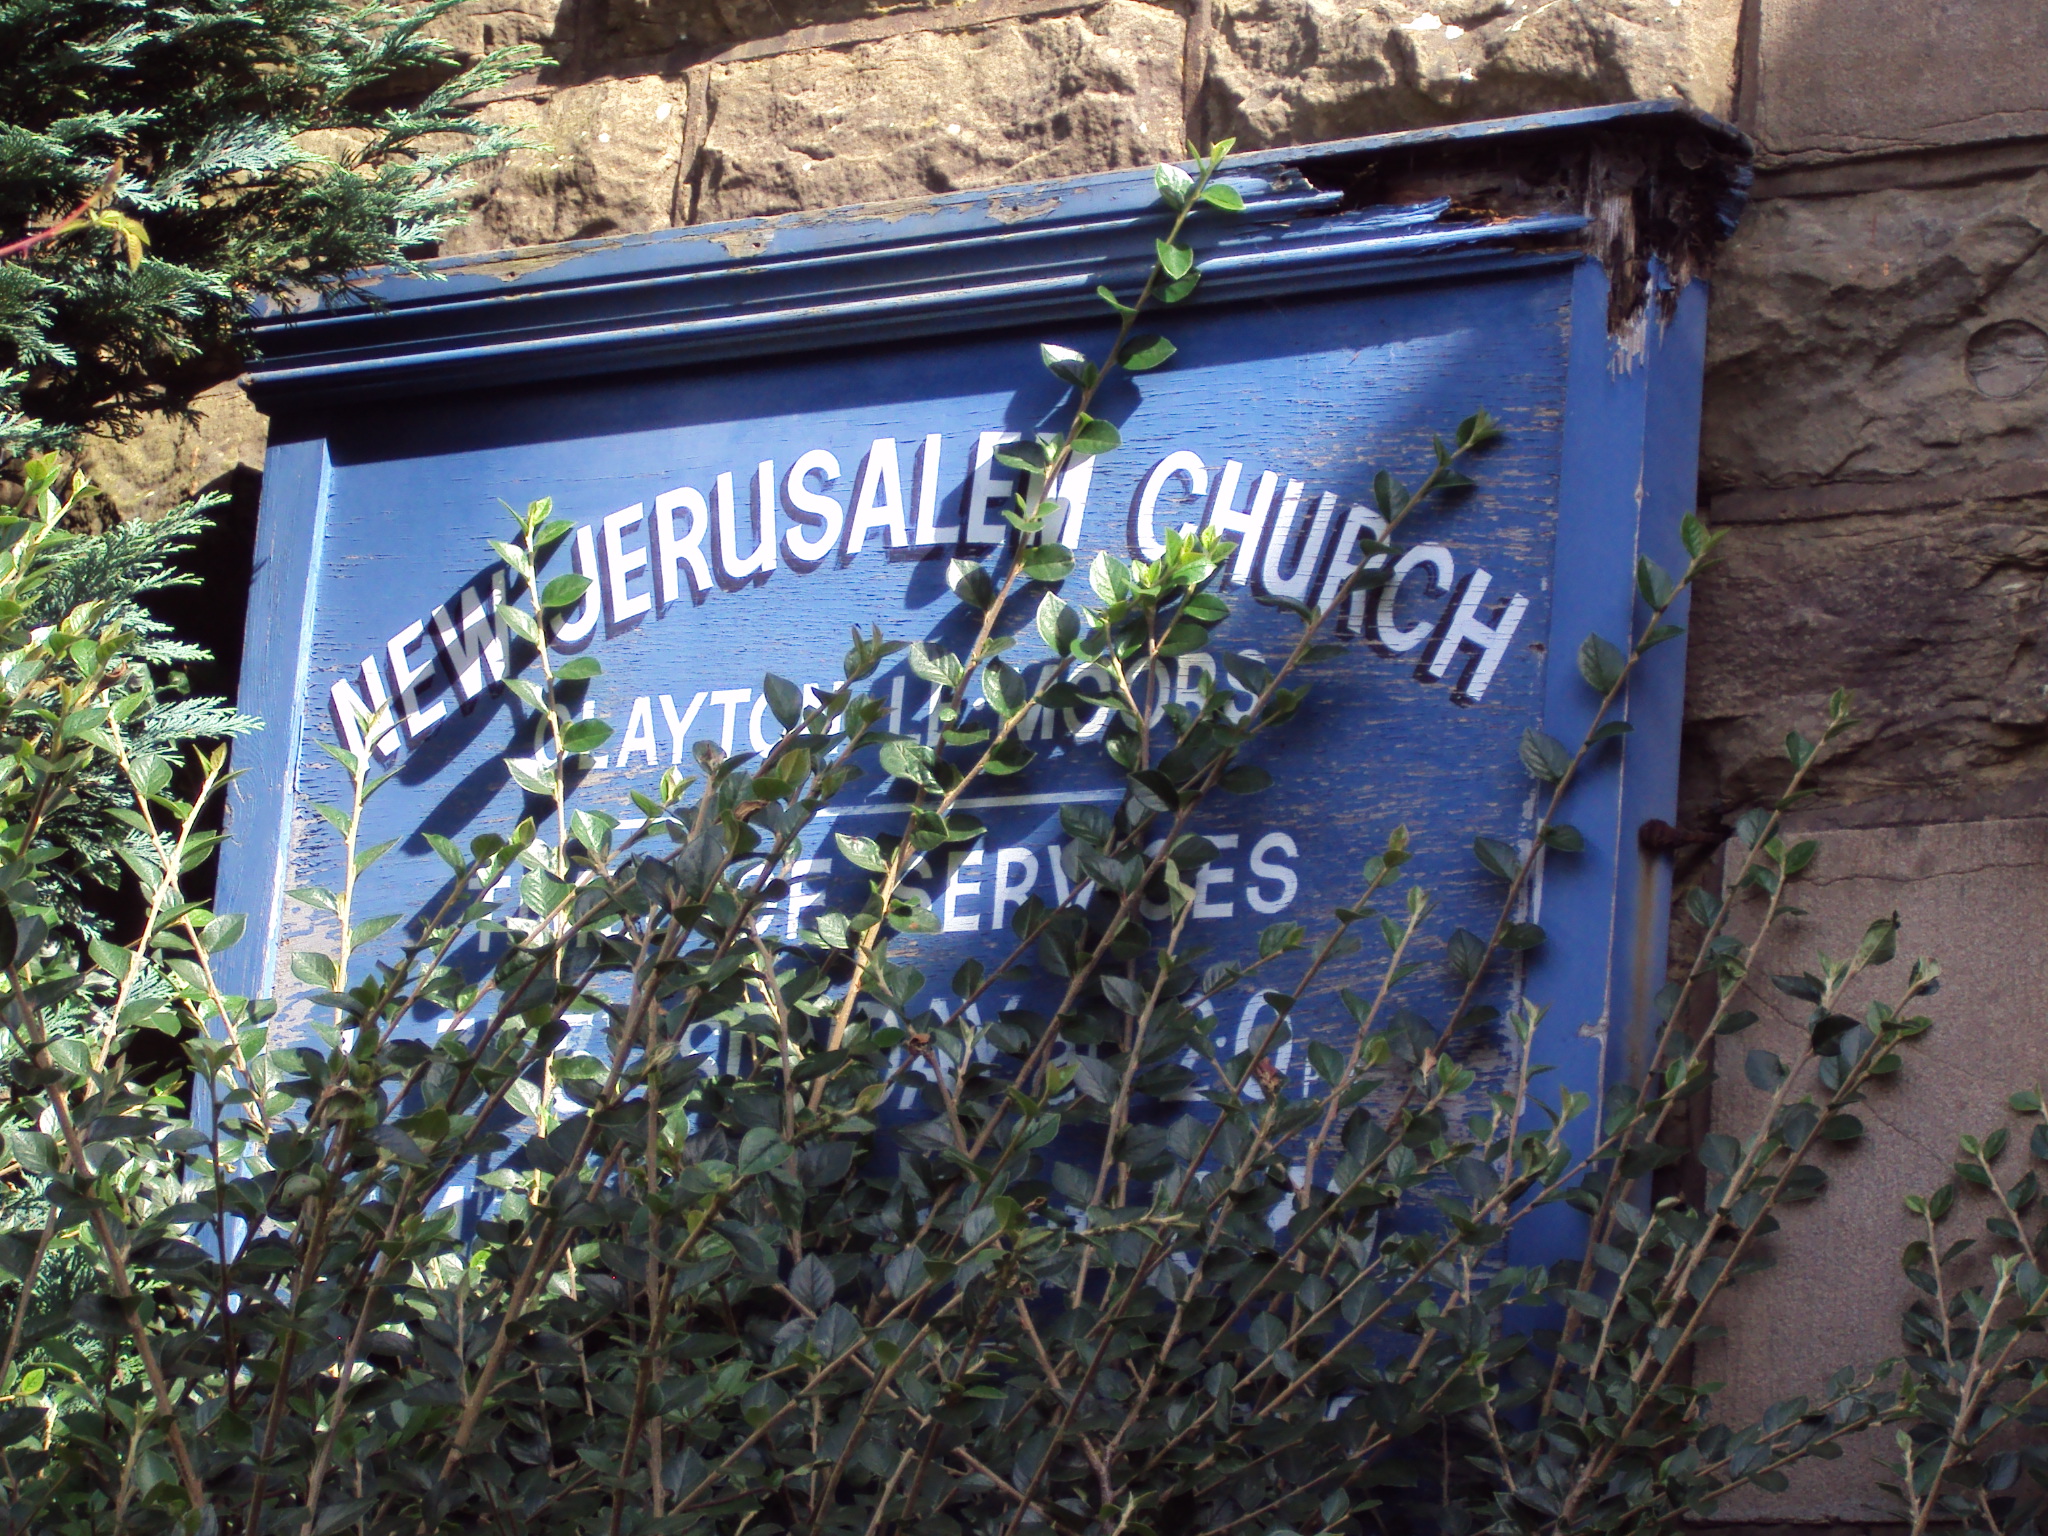 The rather overgrown Church sign